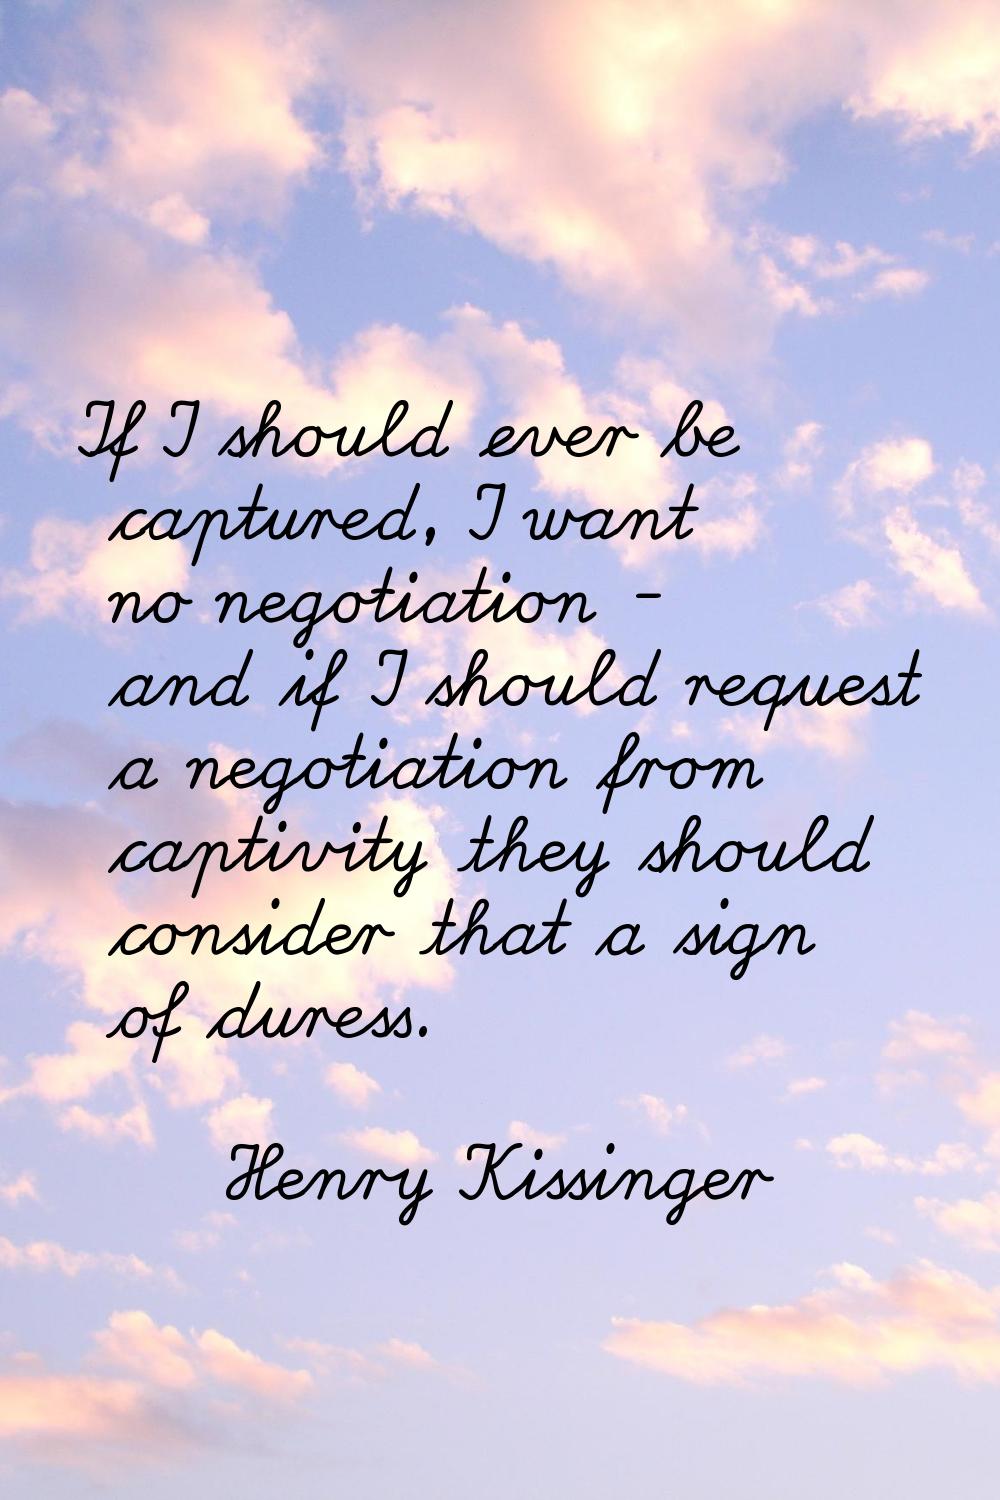 If I should ever be captured, I want no negotiation - and if I should request a negotiation from ca